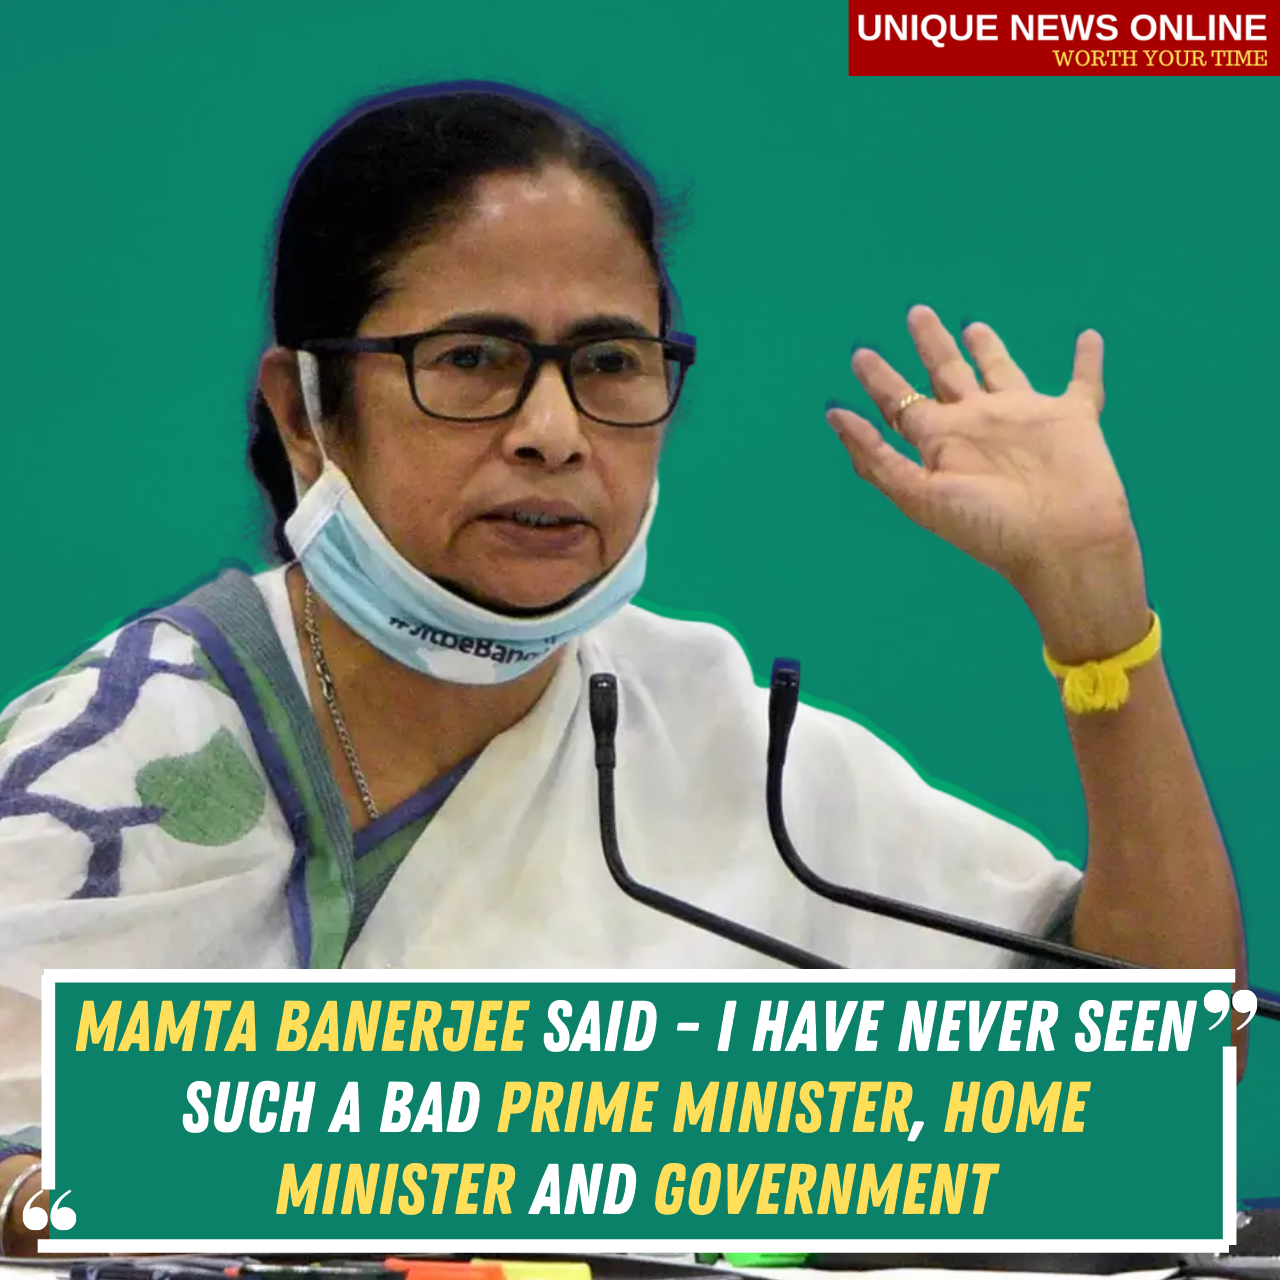 Mamata Banerjee said - I have never seen such a bad Prime Minister, Home Minister and Government